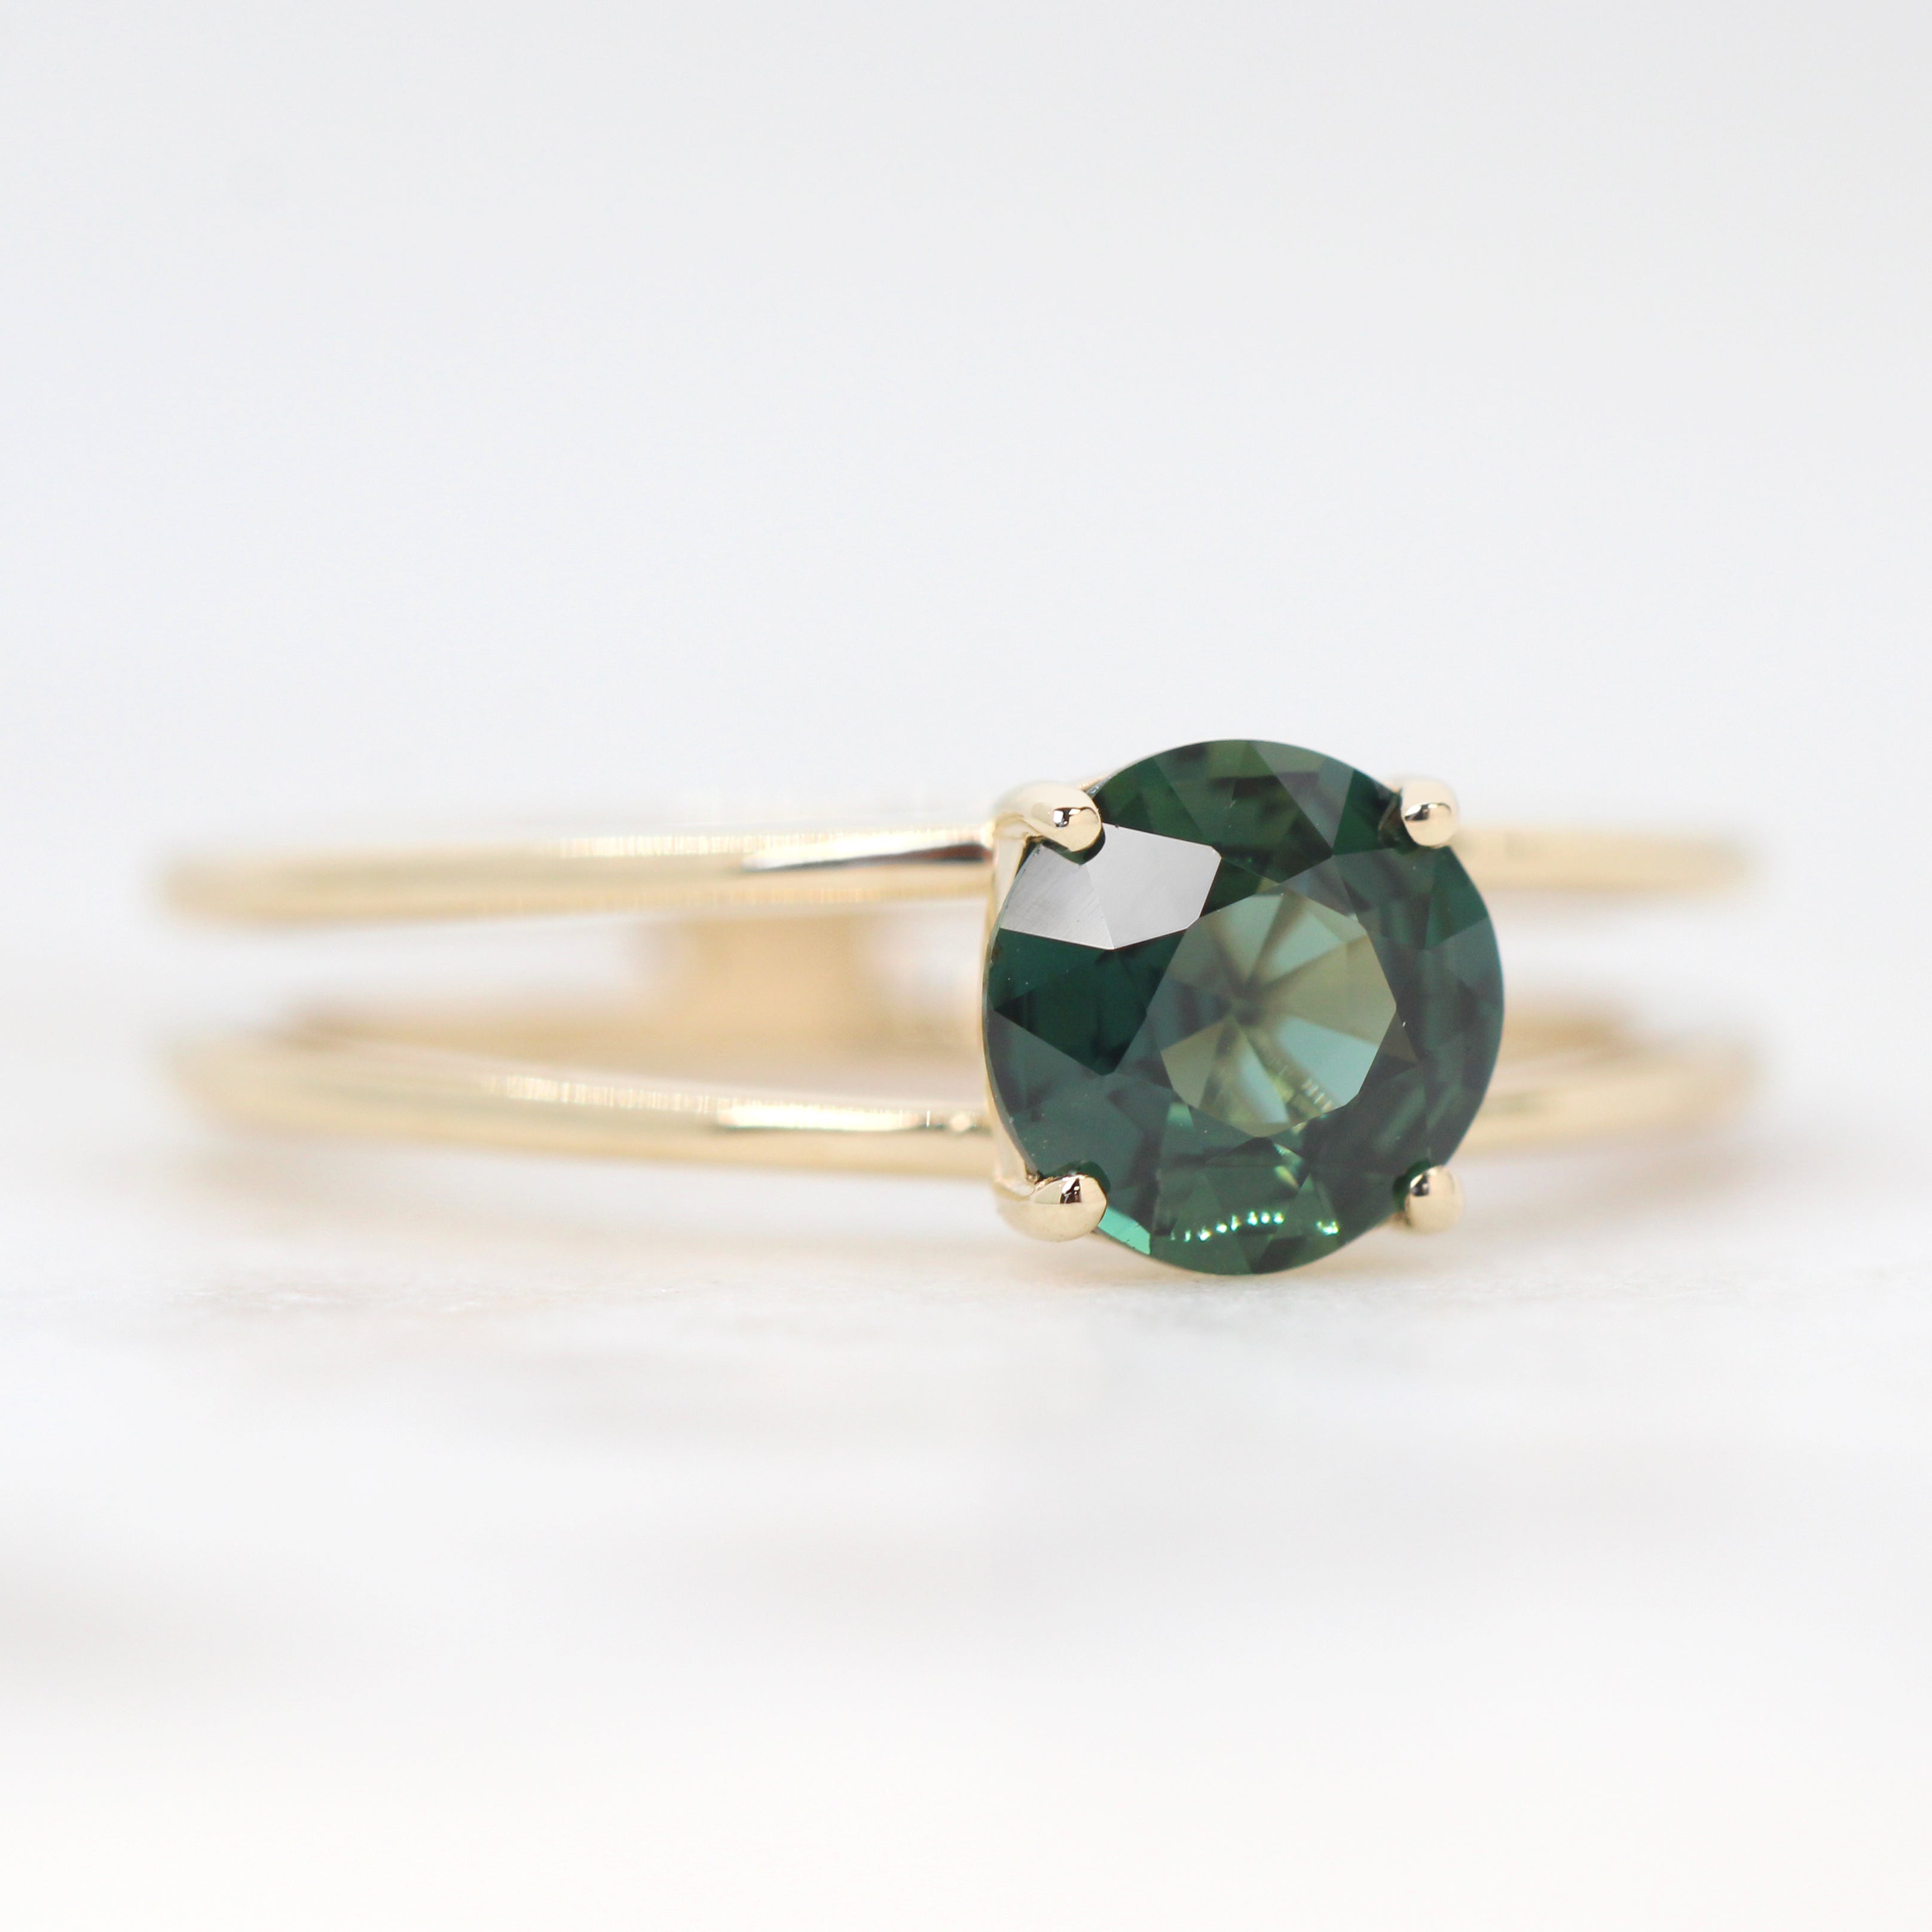 Apryl Ring with a 1.15 Carat Round Dark Teal Sapphire in 14k Yellow Gold - Ready to Size and Ship - Midwinter Co. Alternative Bridal Rings and Modern Fine Jewelry